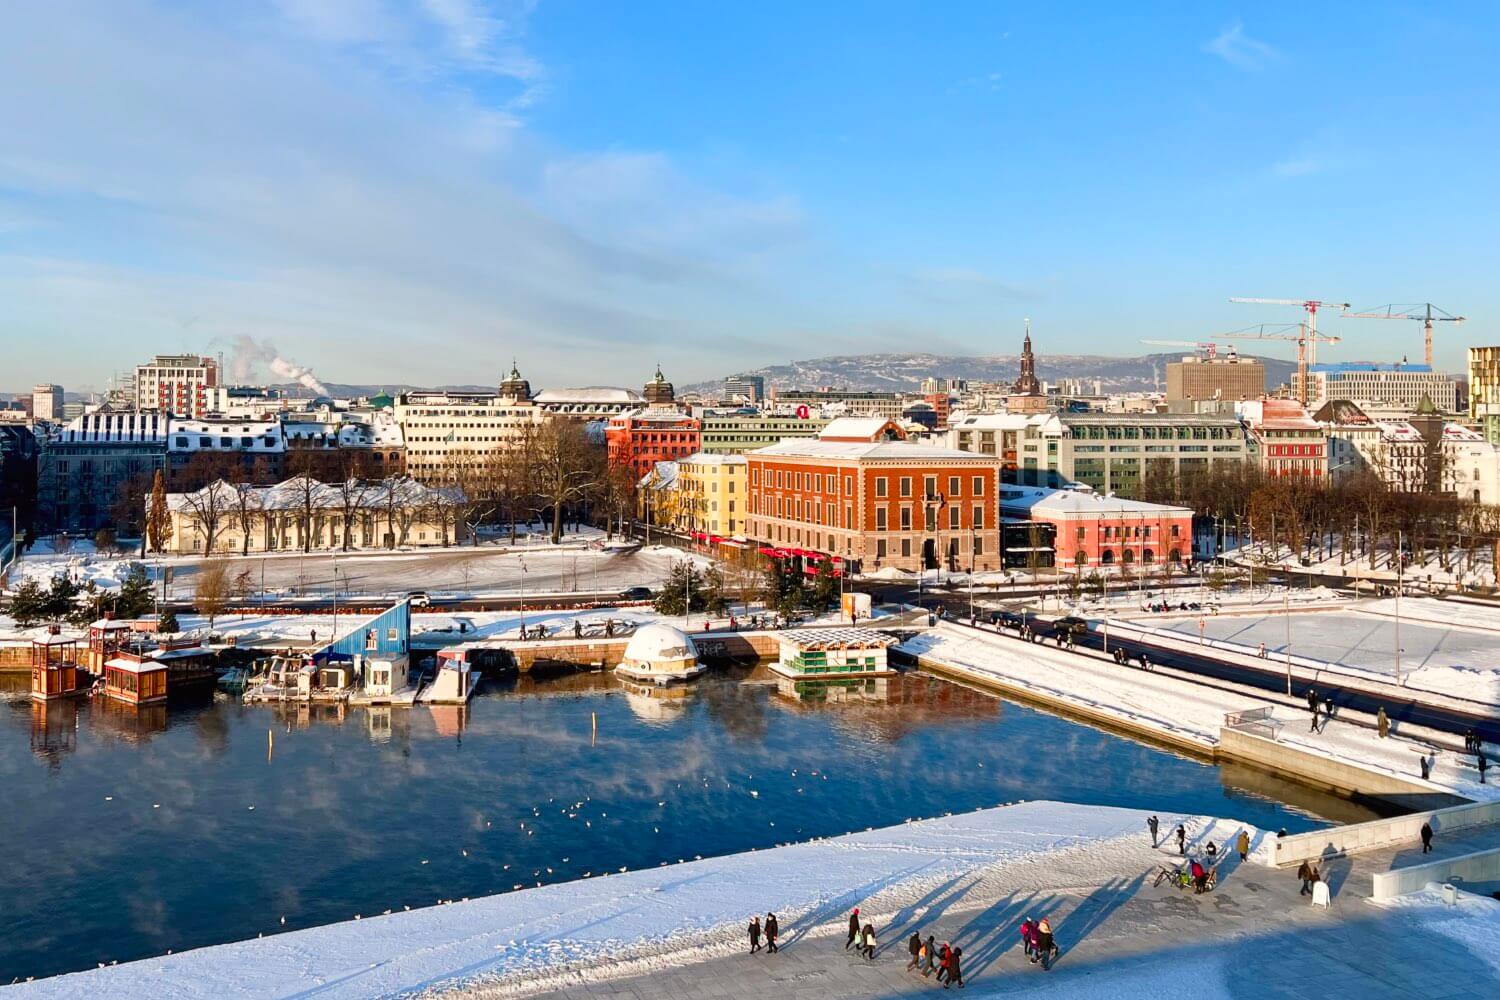 The view of Oslo in winter as seen from the rooftop viewing platform at the city’s Opera House